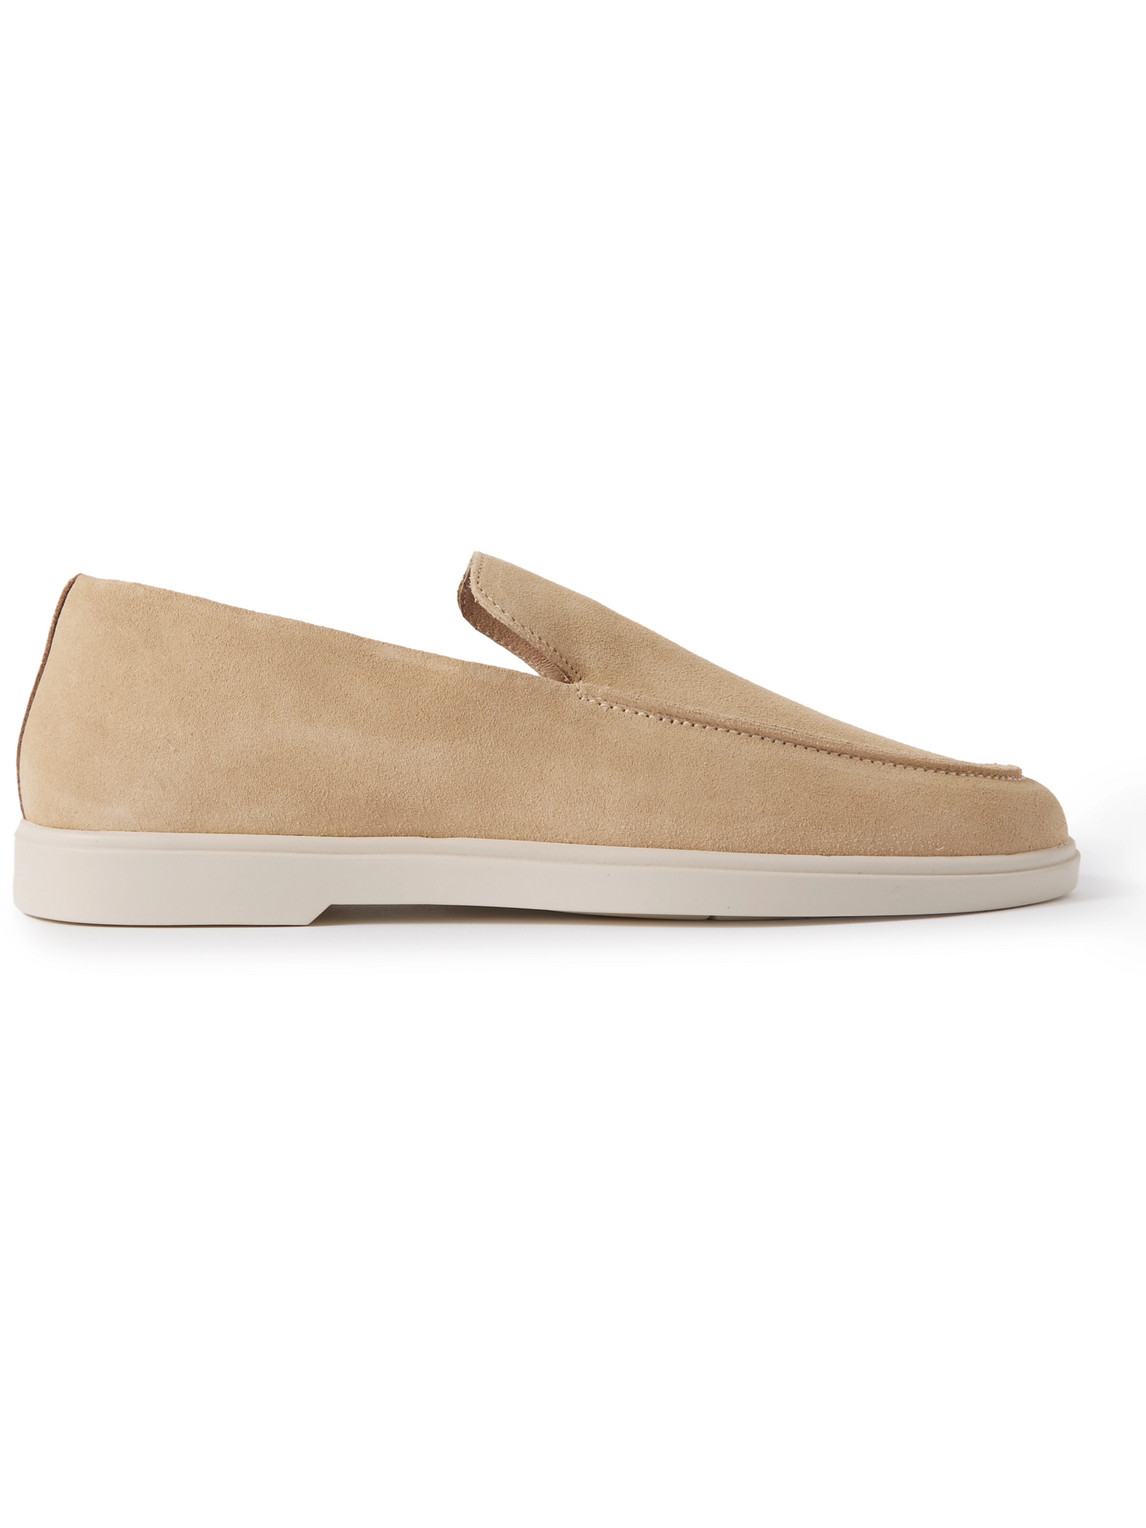 FRESCOBOL CARIOCA MIGUEL LEATHER-TRIMMED SUEDE LOAFERS